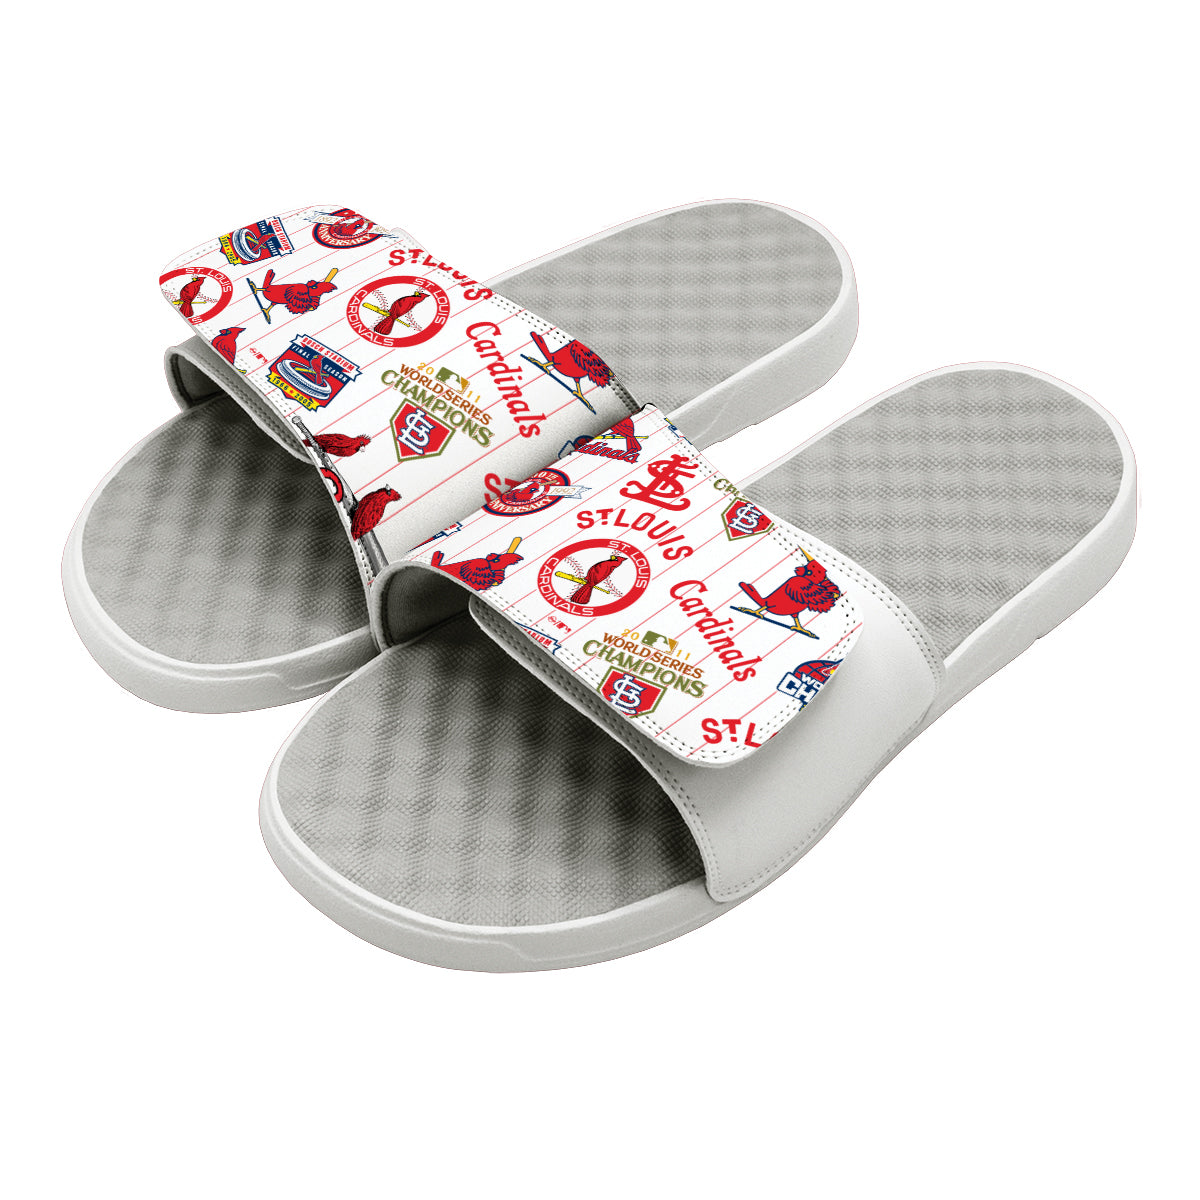 Cardinals Cooperstown Loudmouth Slides